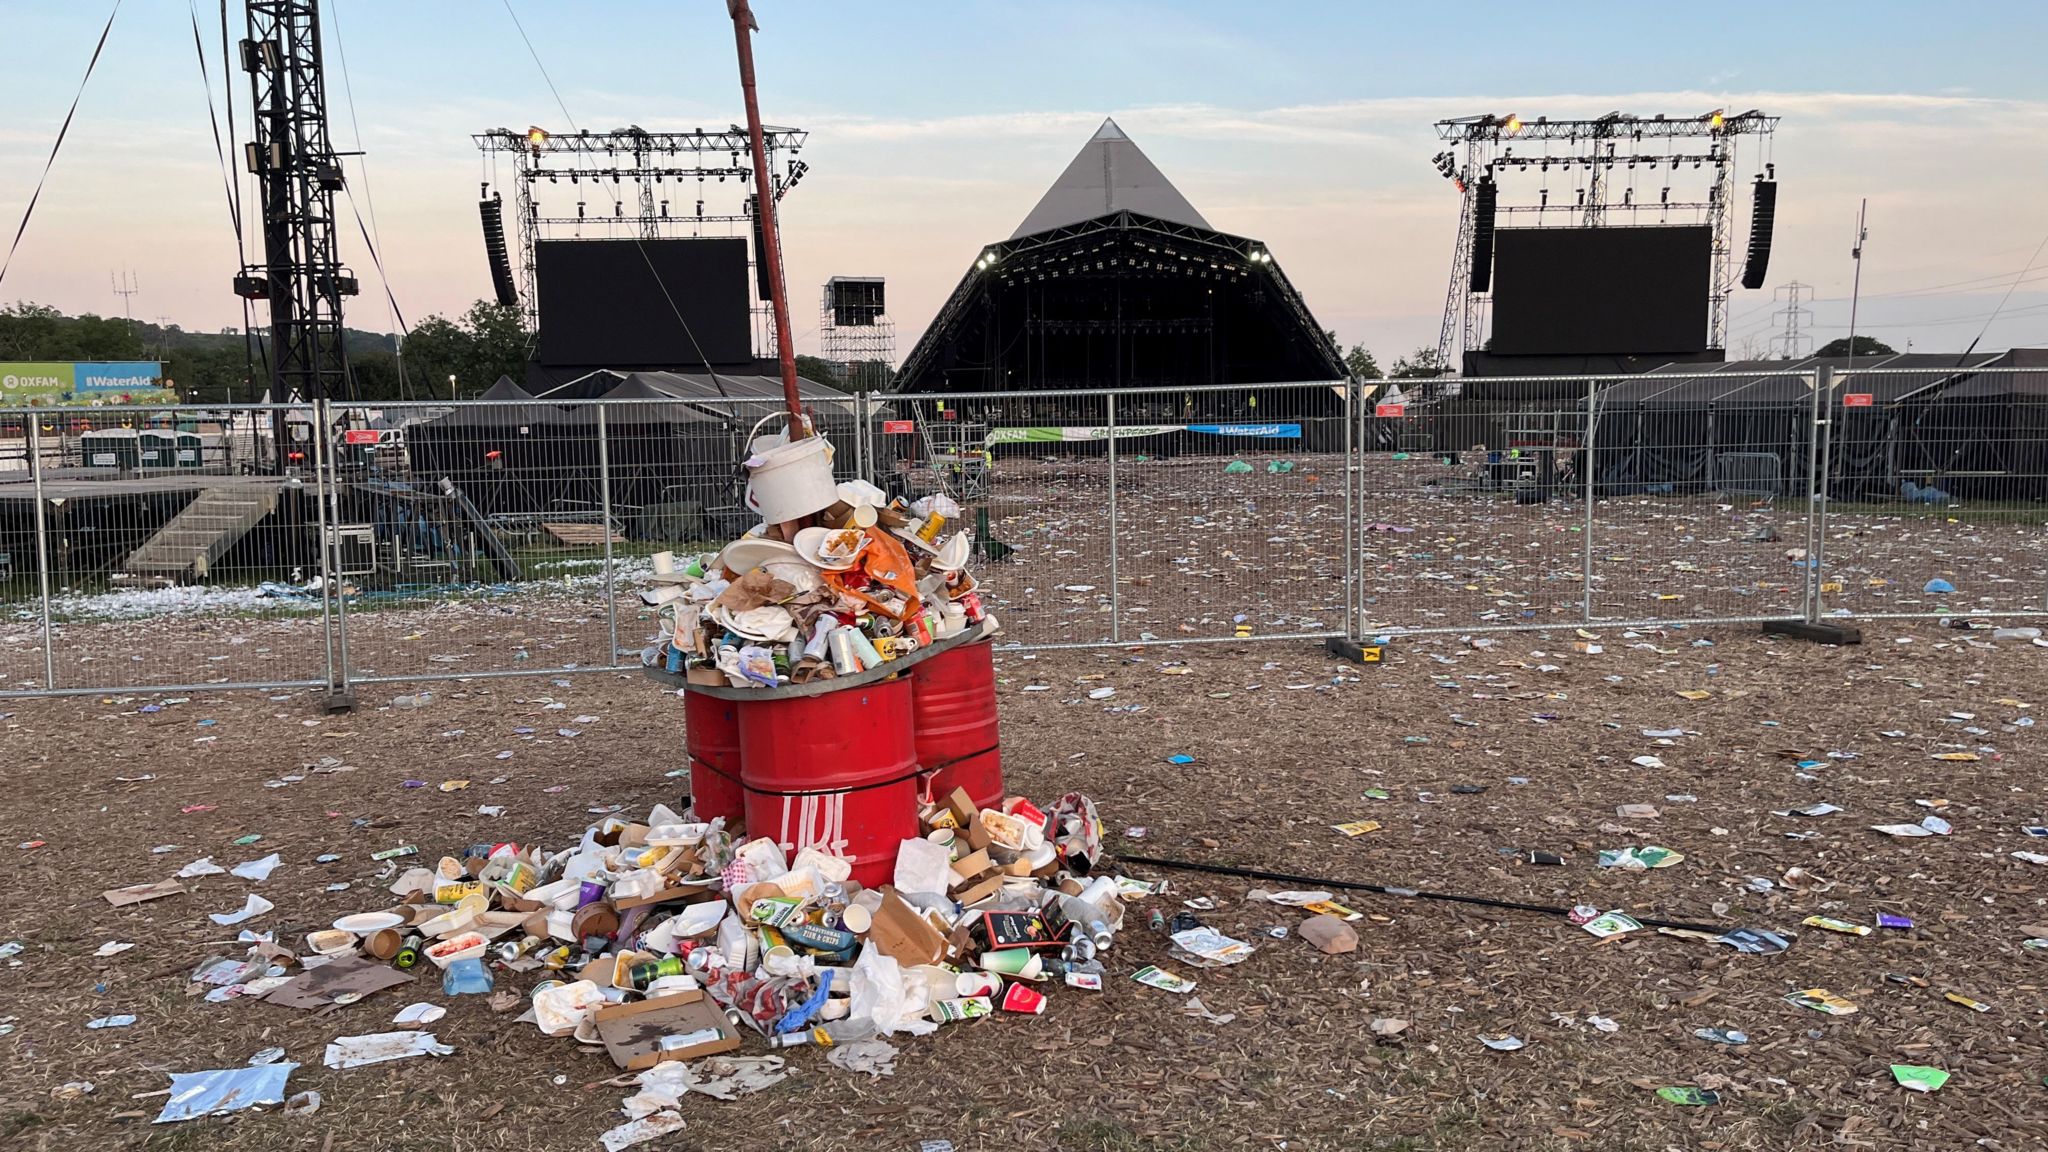 A red bin with rubbish overflowing next to the Pyramid stage at Glastonbury